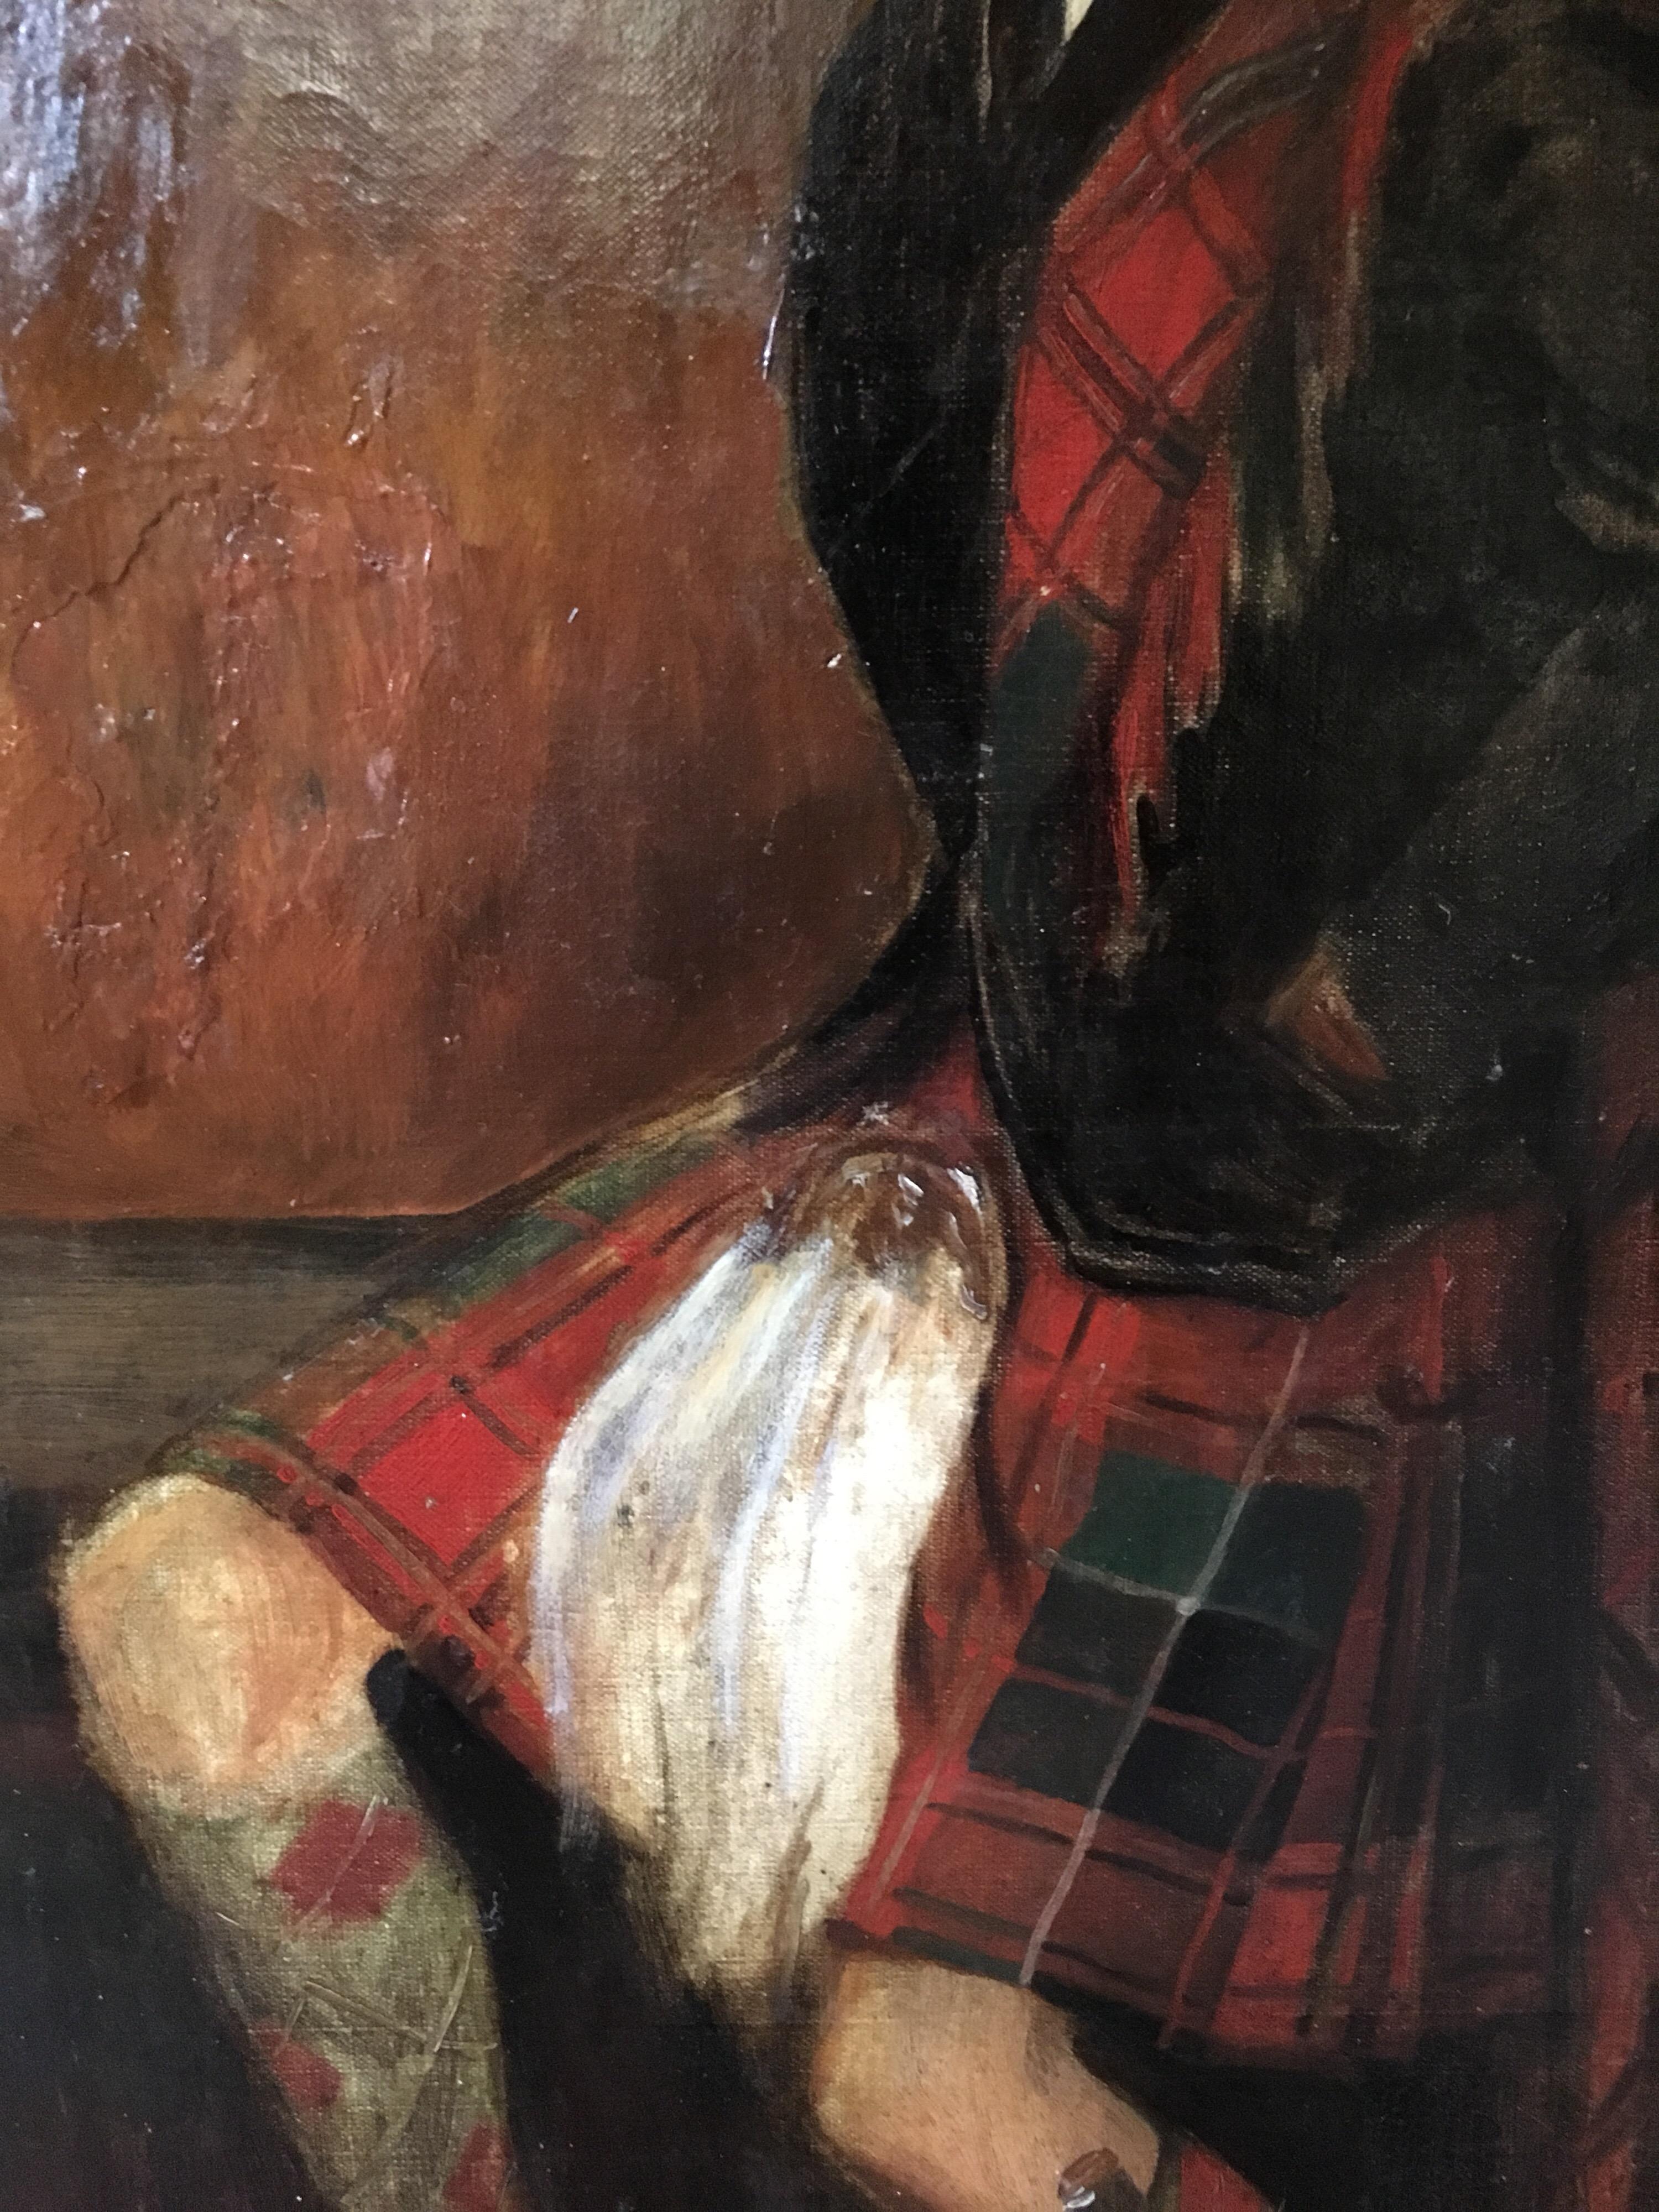 Scottish Gentlemen, Large Impressionist Portrait, Signed Oil Painting 
By Scottish artist, W.Burns, Early 20th Century
Signed and dated '1903' by the artist on the lower left hand corner
Oil painting on canvas, framed
Framed size: 36 x 25